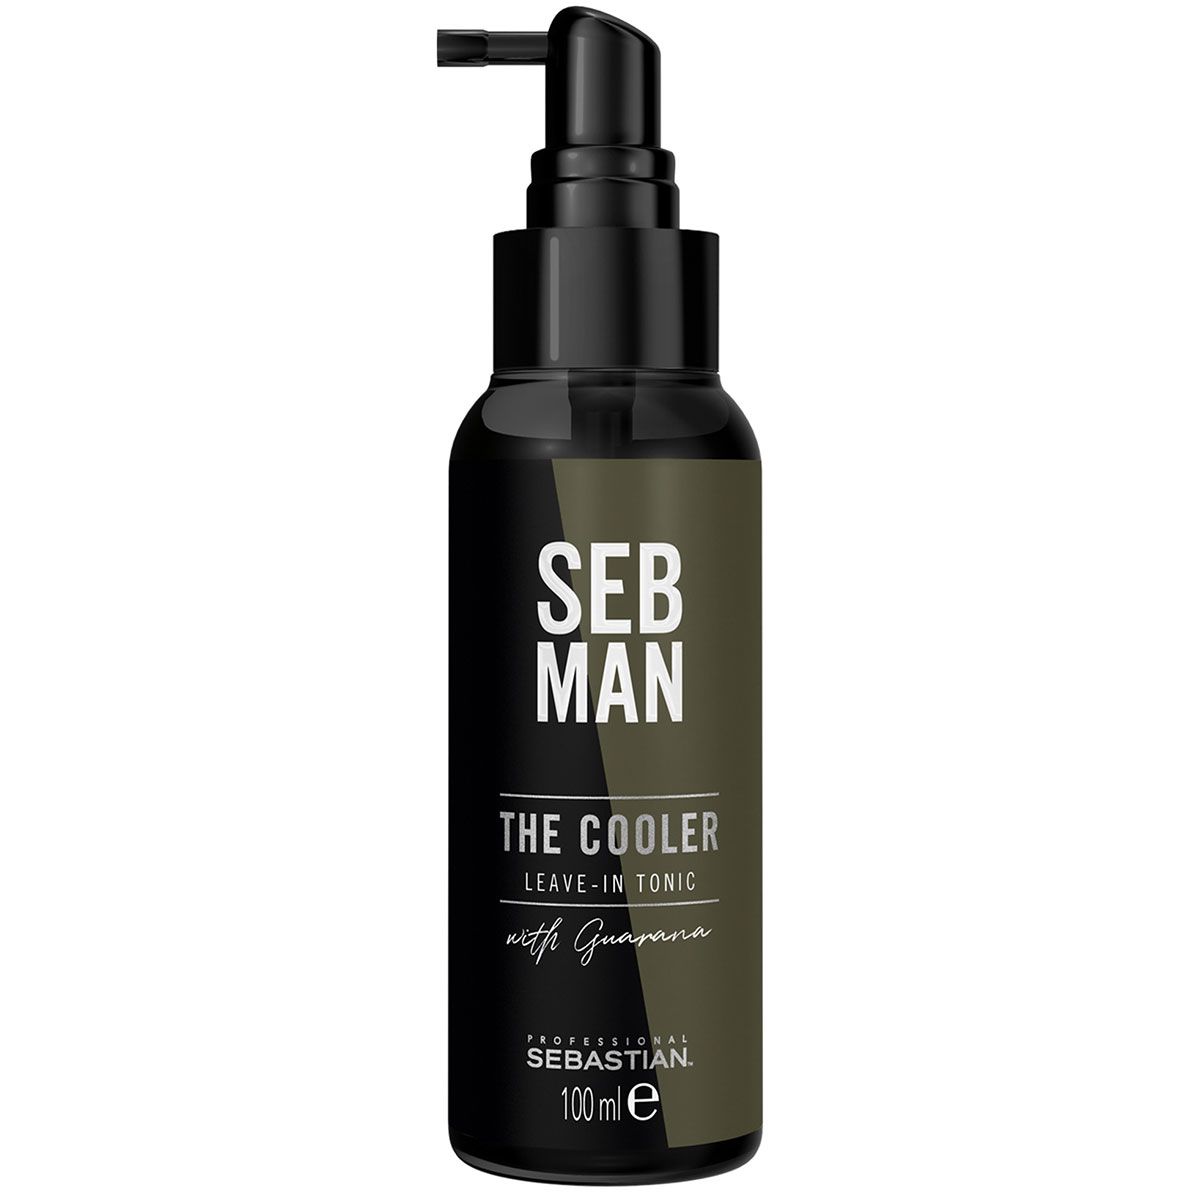 SEB MAN THE COOLER leave-in tonic 100ML